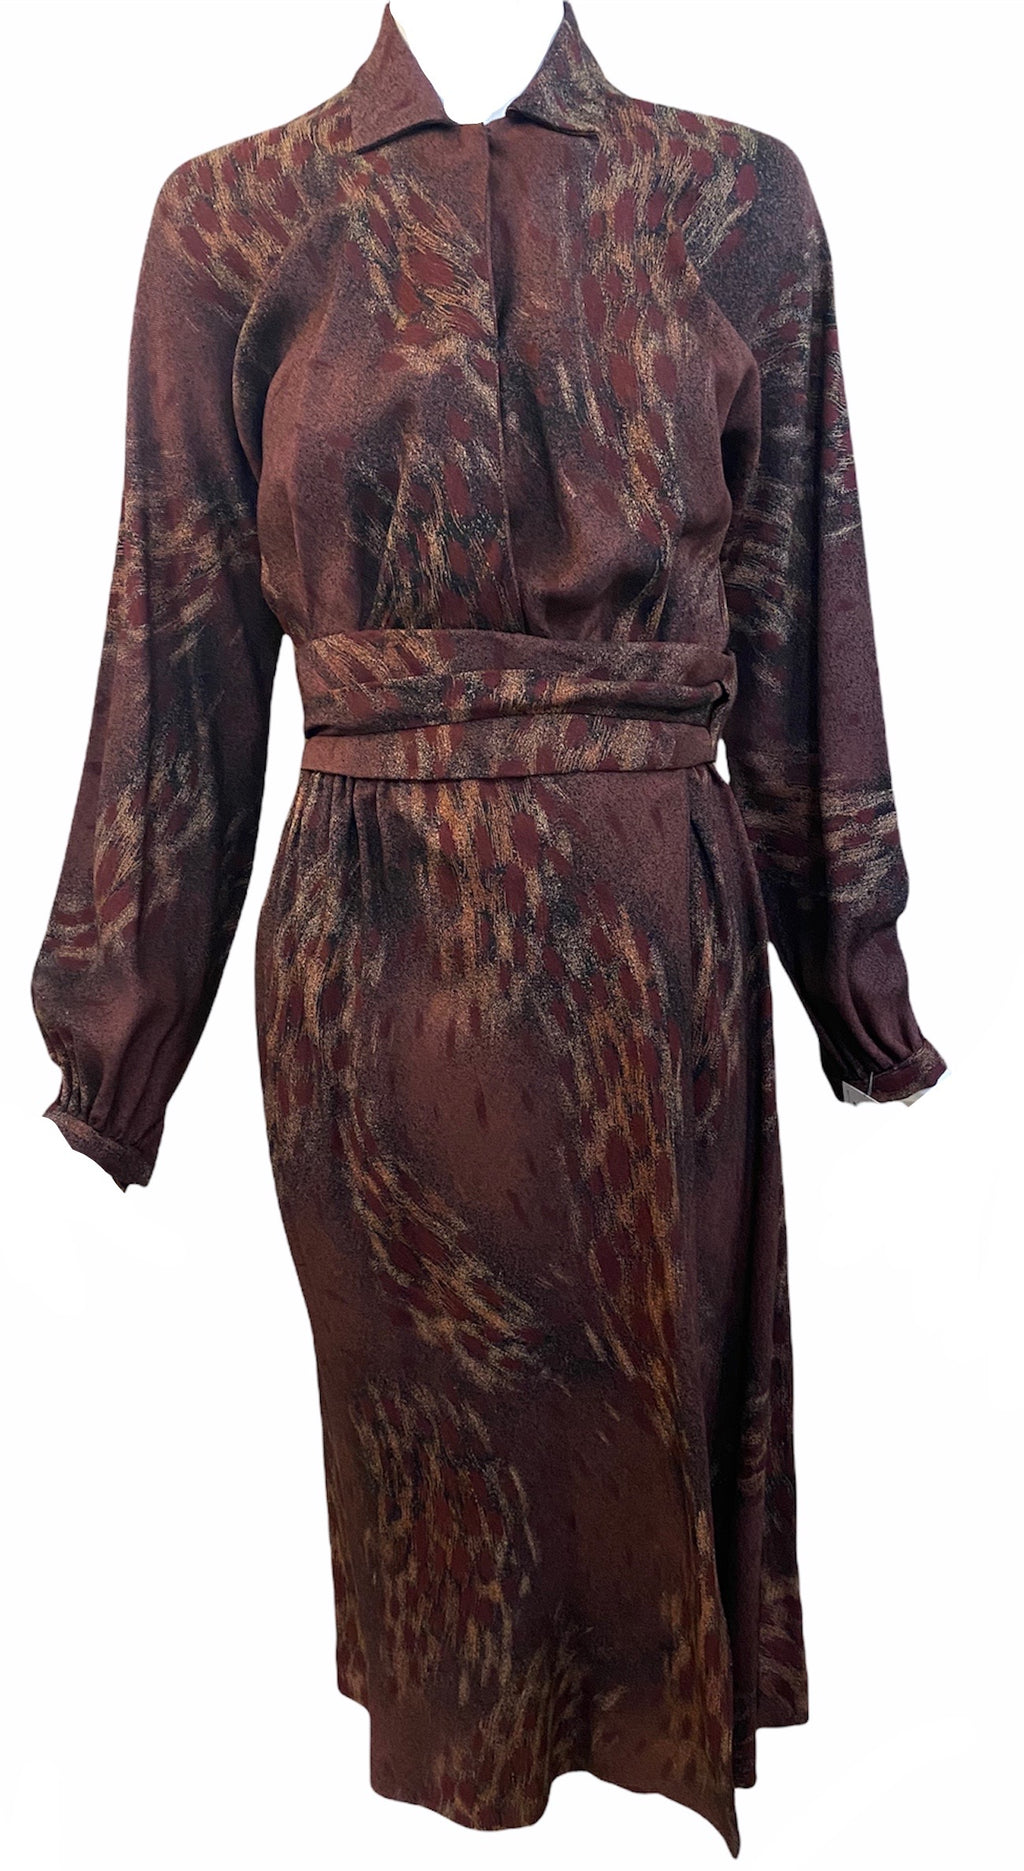  Iconic Halston 70s Brown Print Twill Wrap Dress FRONT 1 of 5